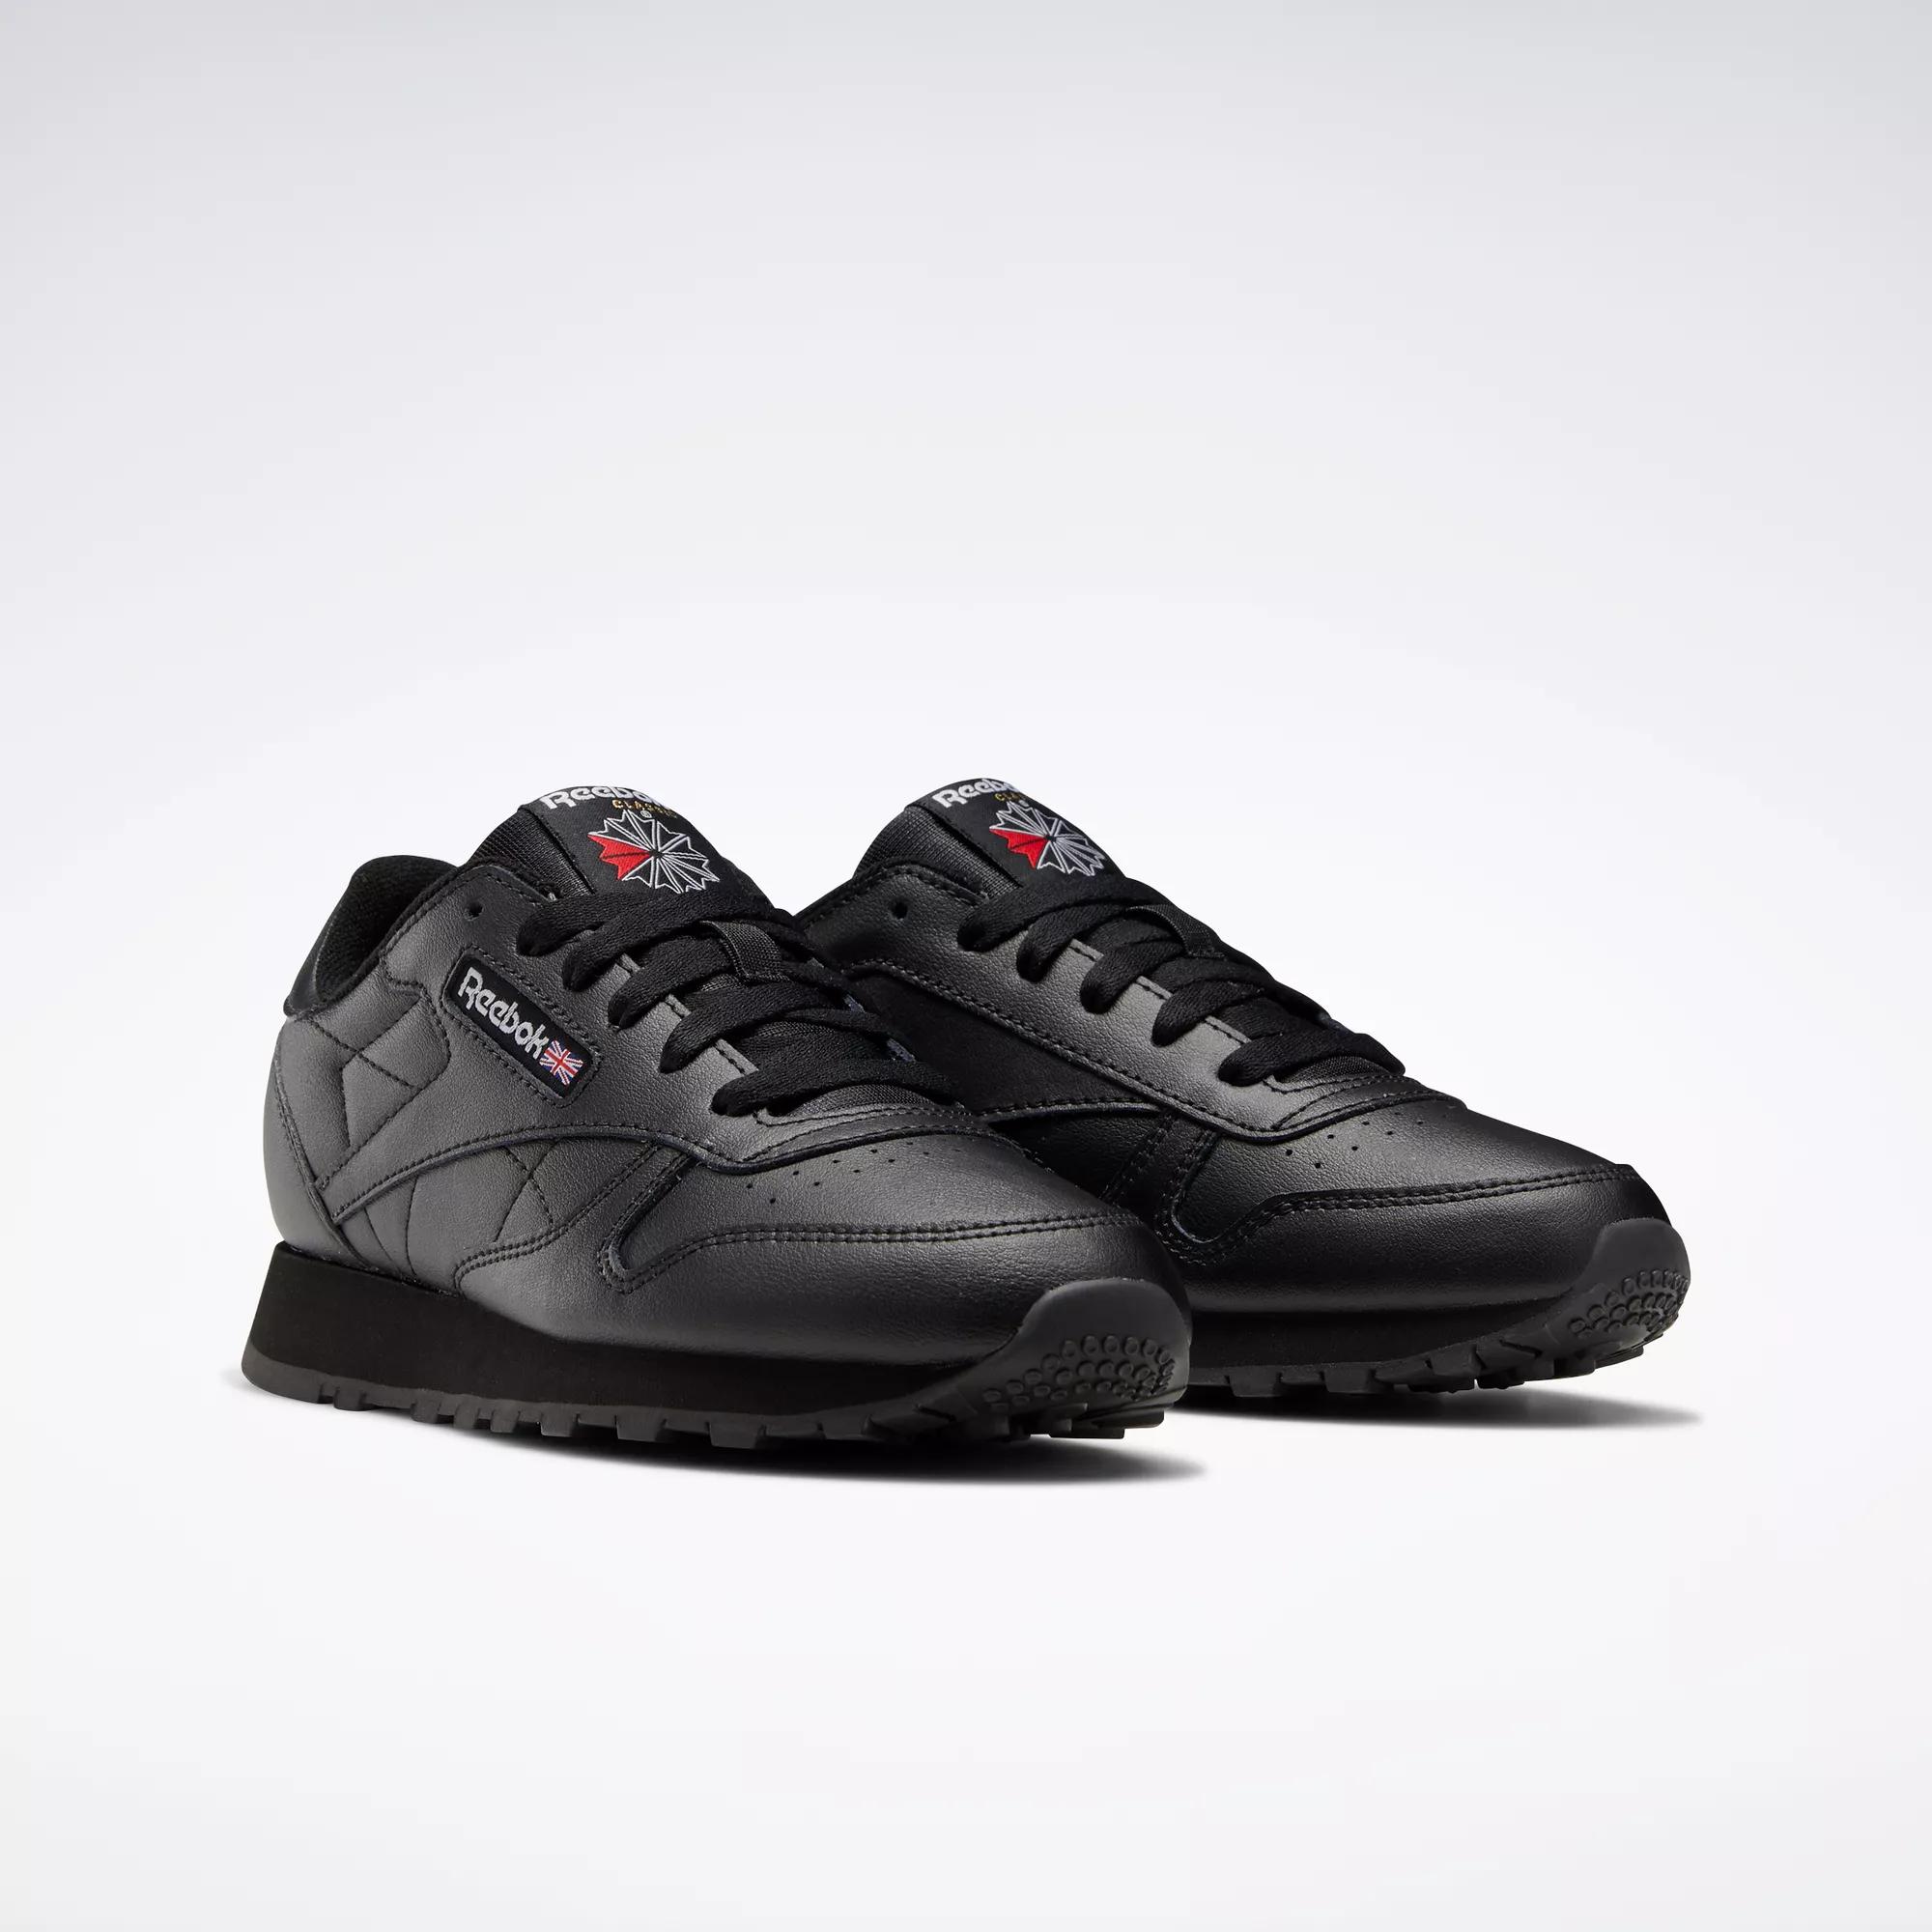 shabby mount scramble Classic Leather Shoes - Grade School - Core Black / Core Black / Core Black  | Reebok